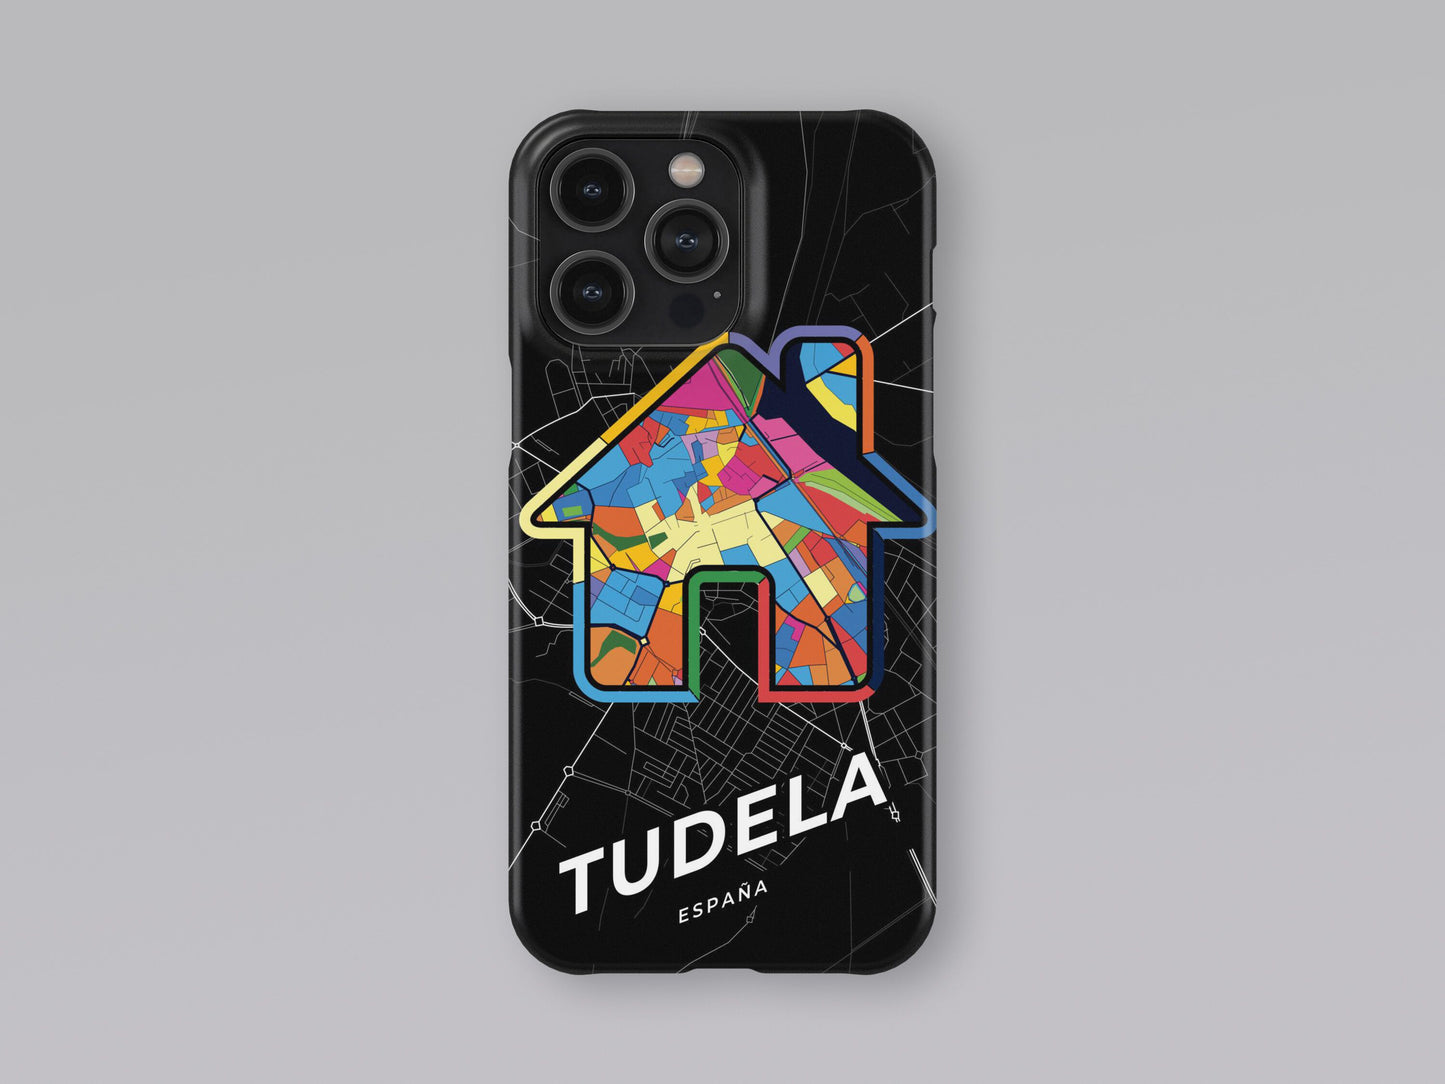 Tudela Spain slim phone case with colorful icon 3